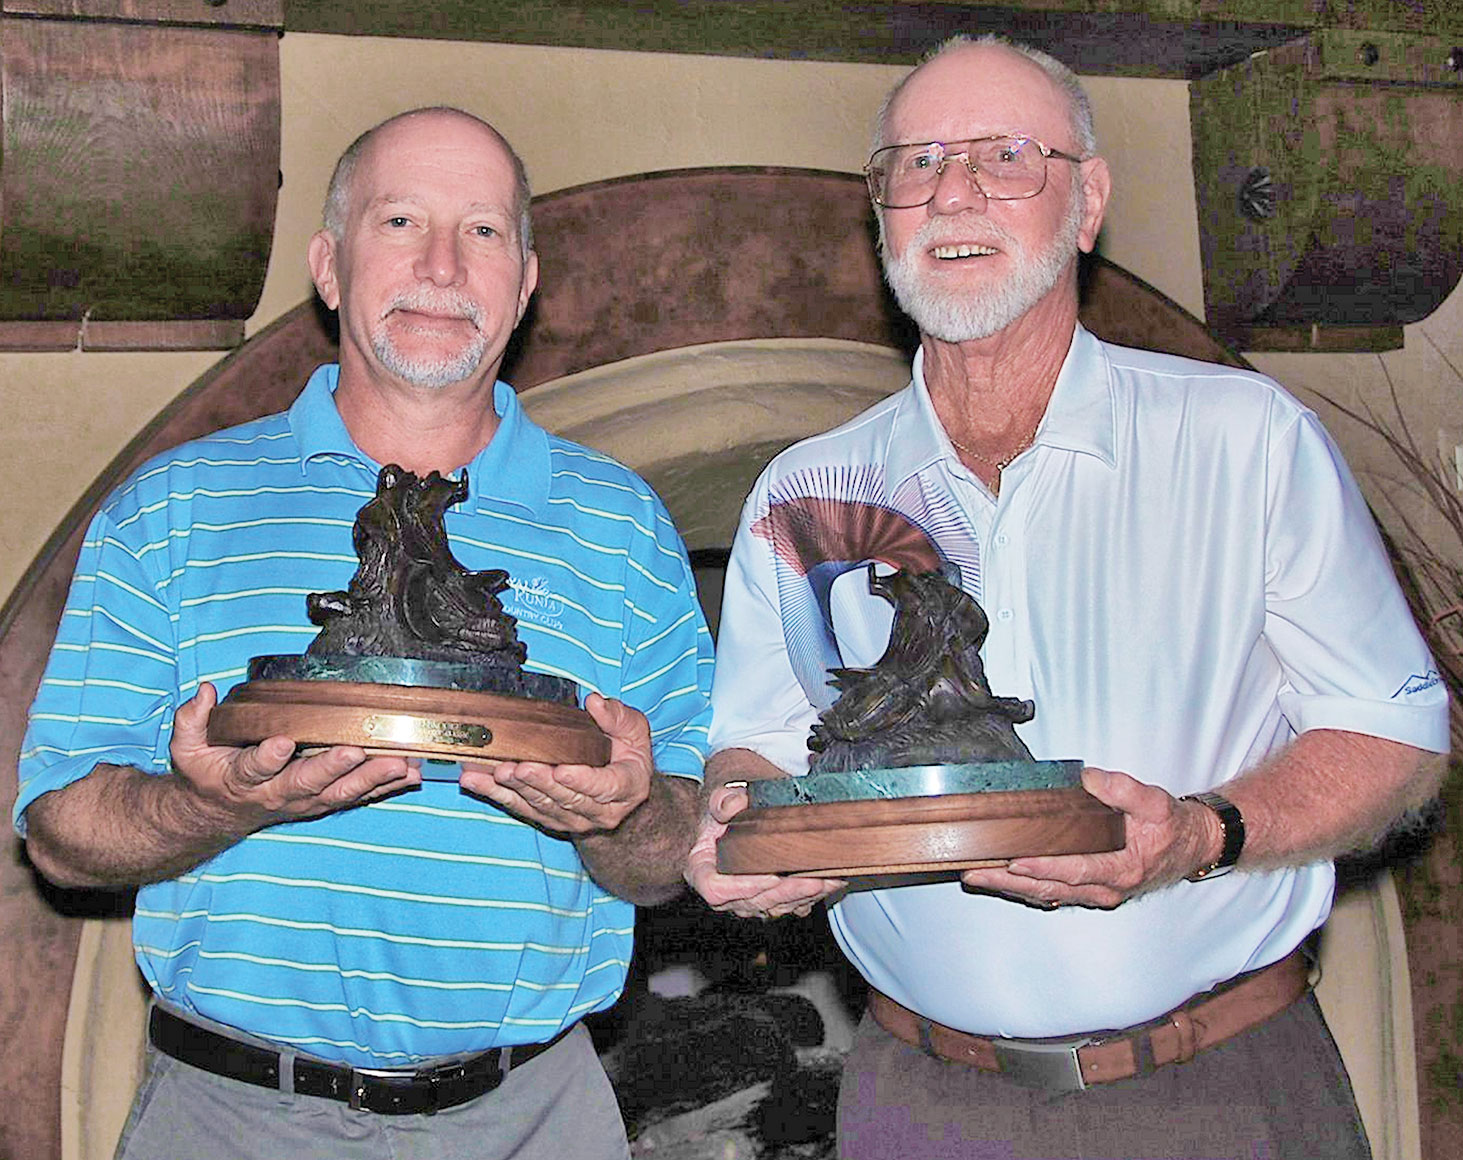 Jim Perko (left) and JR Salladay with their coveted RoadRunner Classic Saddle trophies